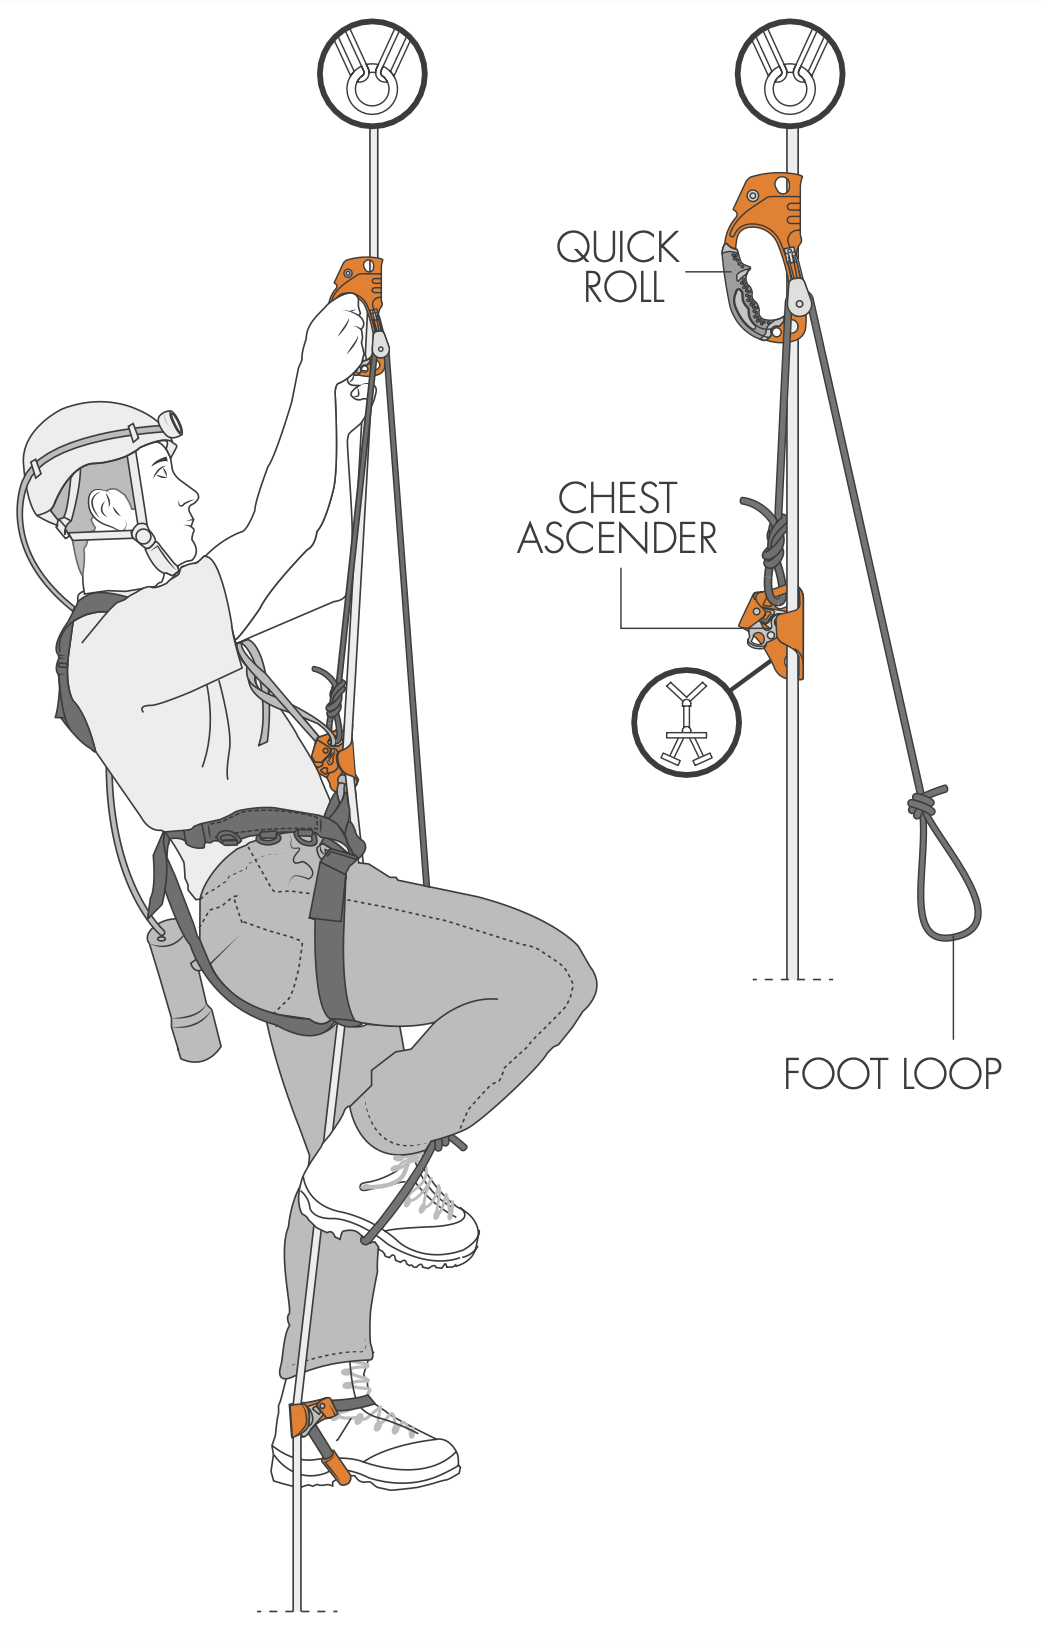 Application of Pulleys in Climbing and Mountaineering